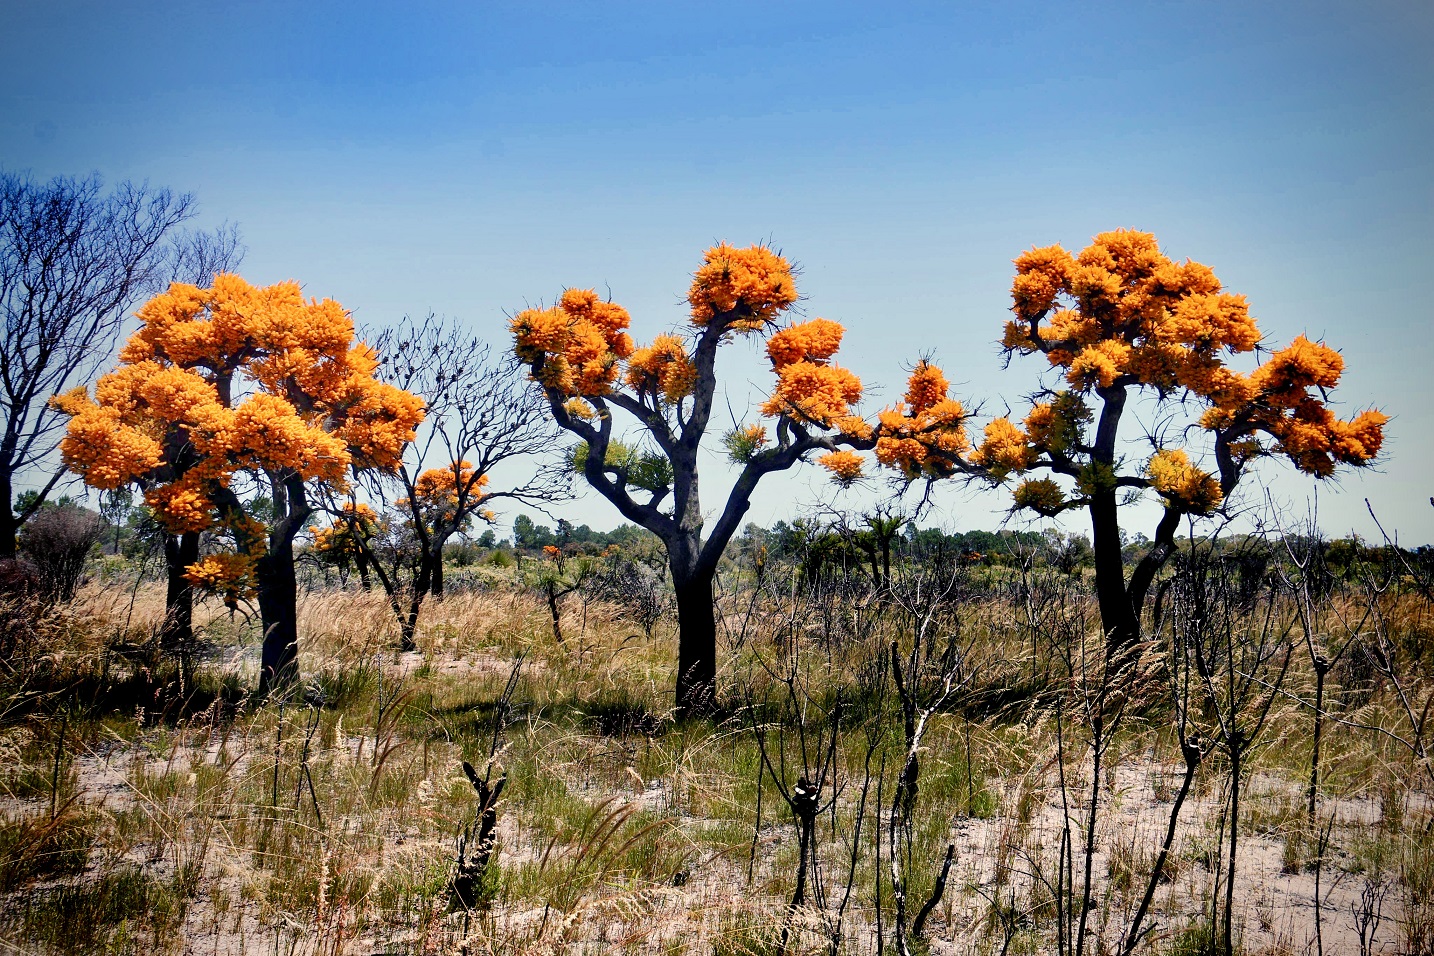 Image shows a bush landscape with three trees covered in bright orange flowers